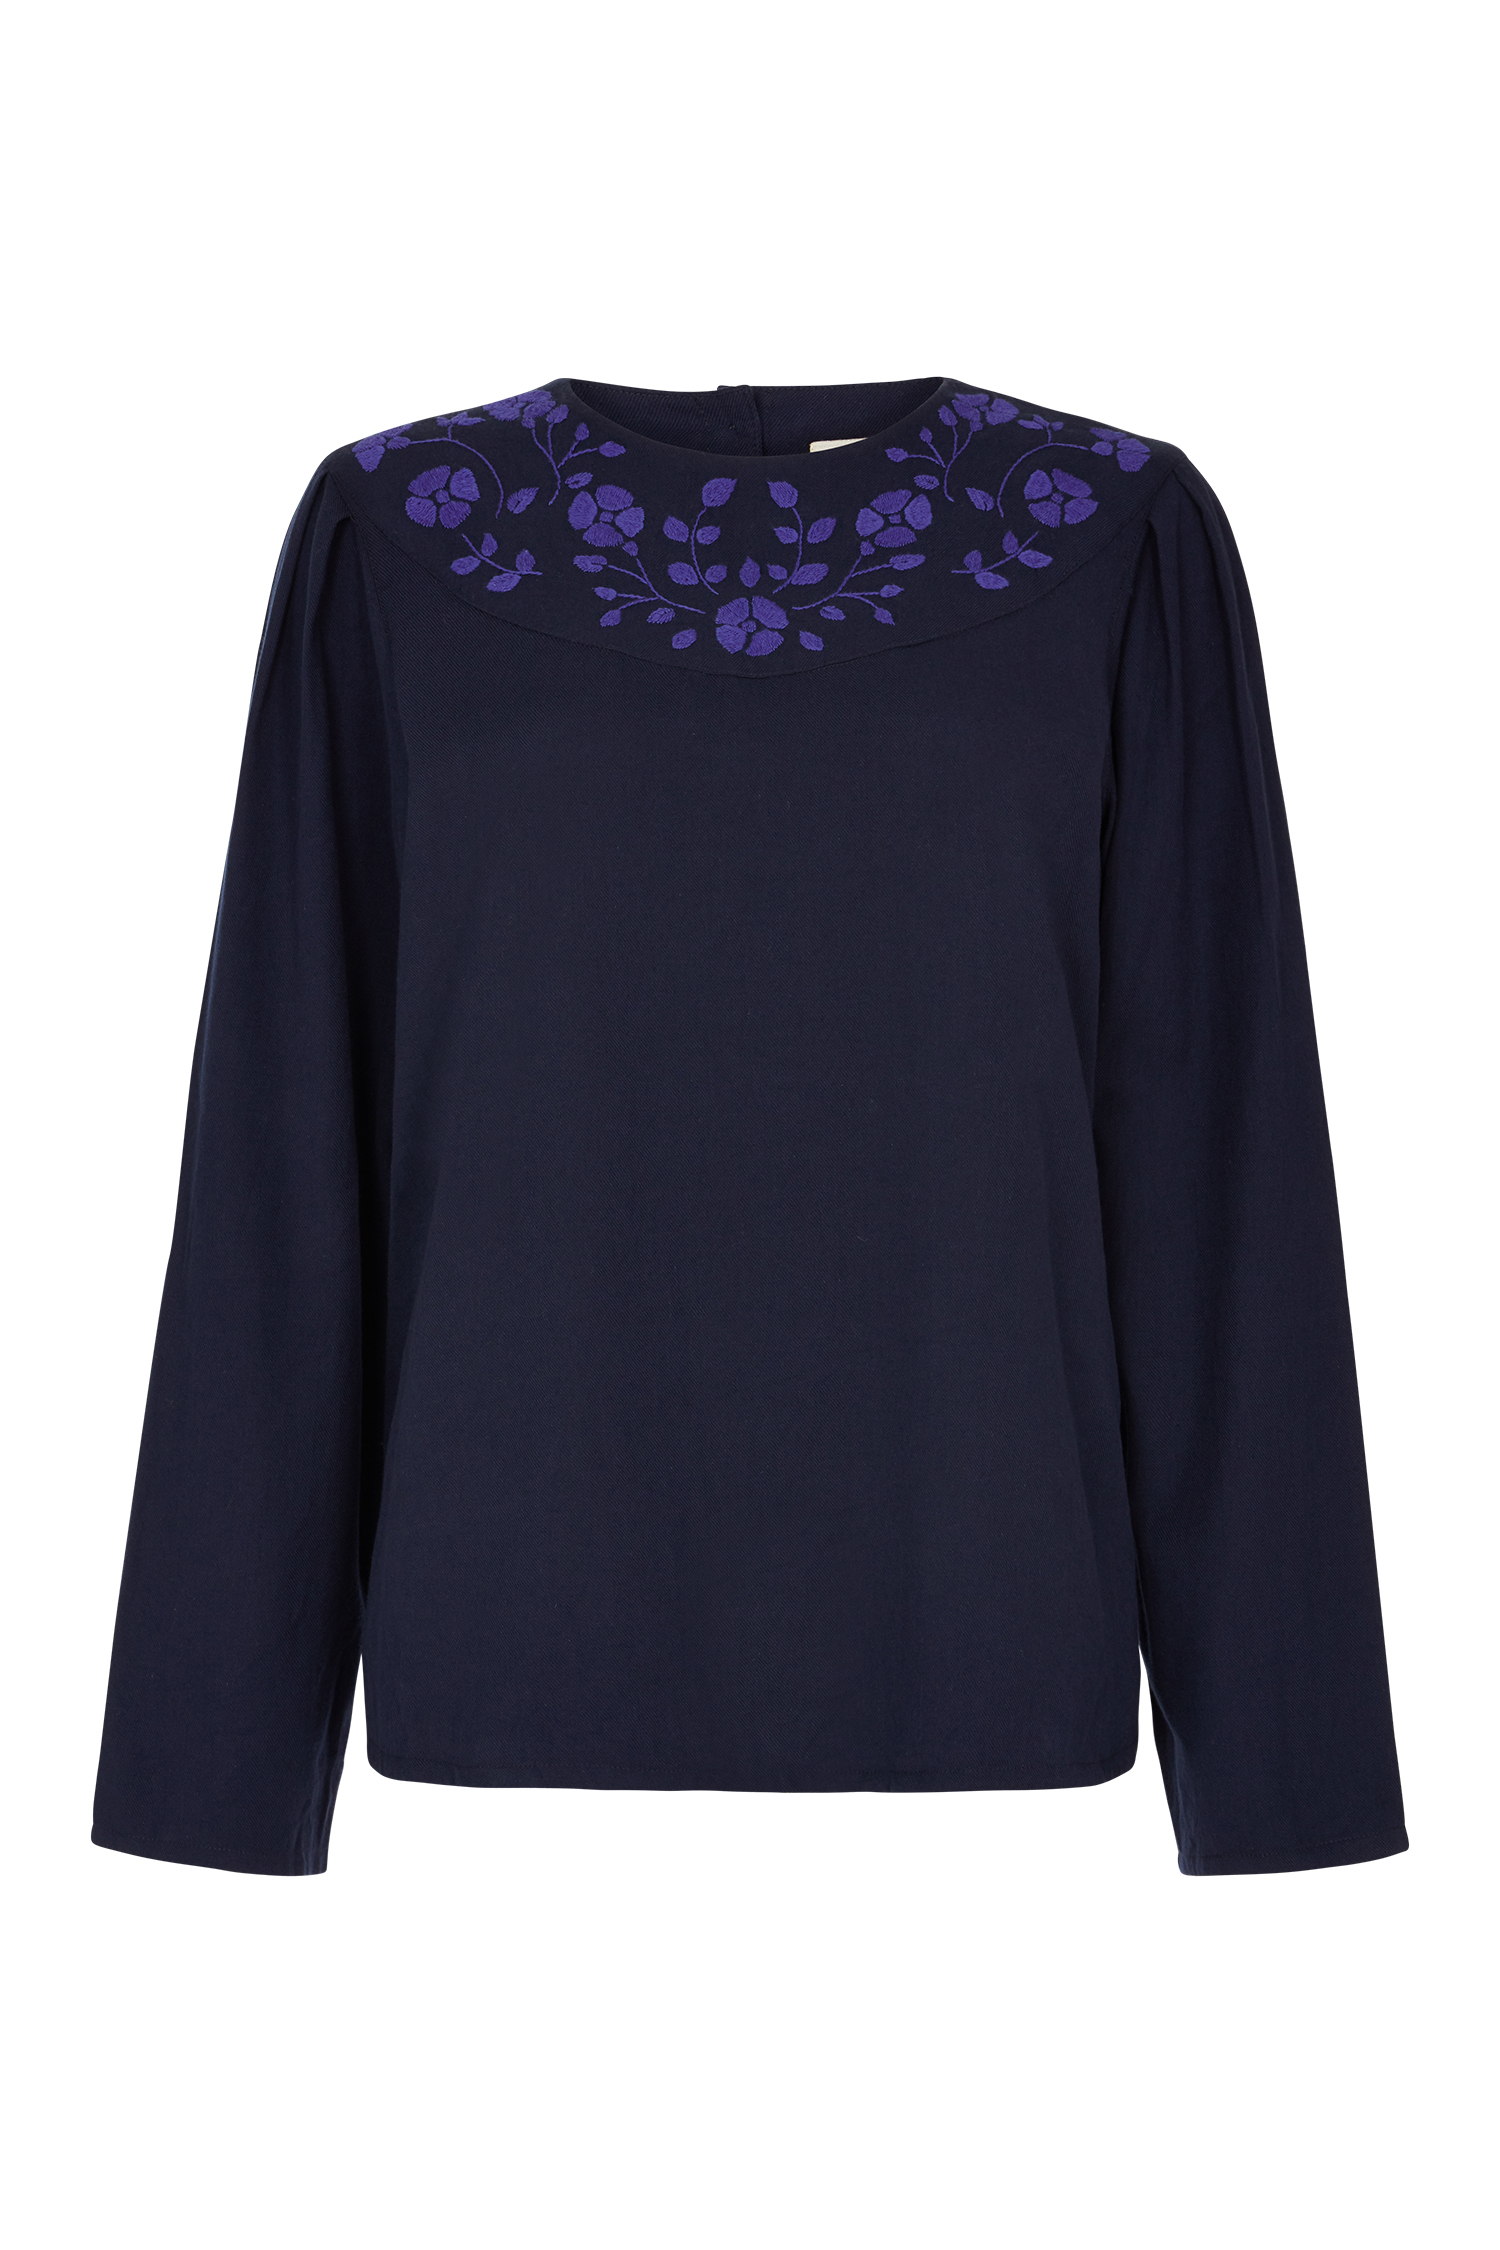 People Tree Keva Embroidered Top Navy